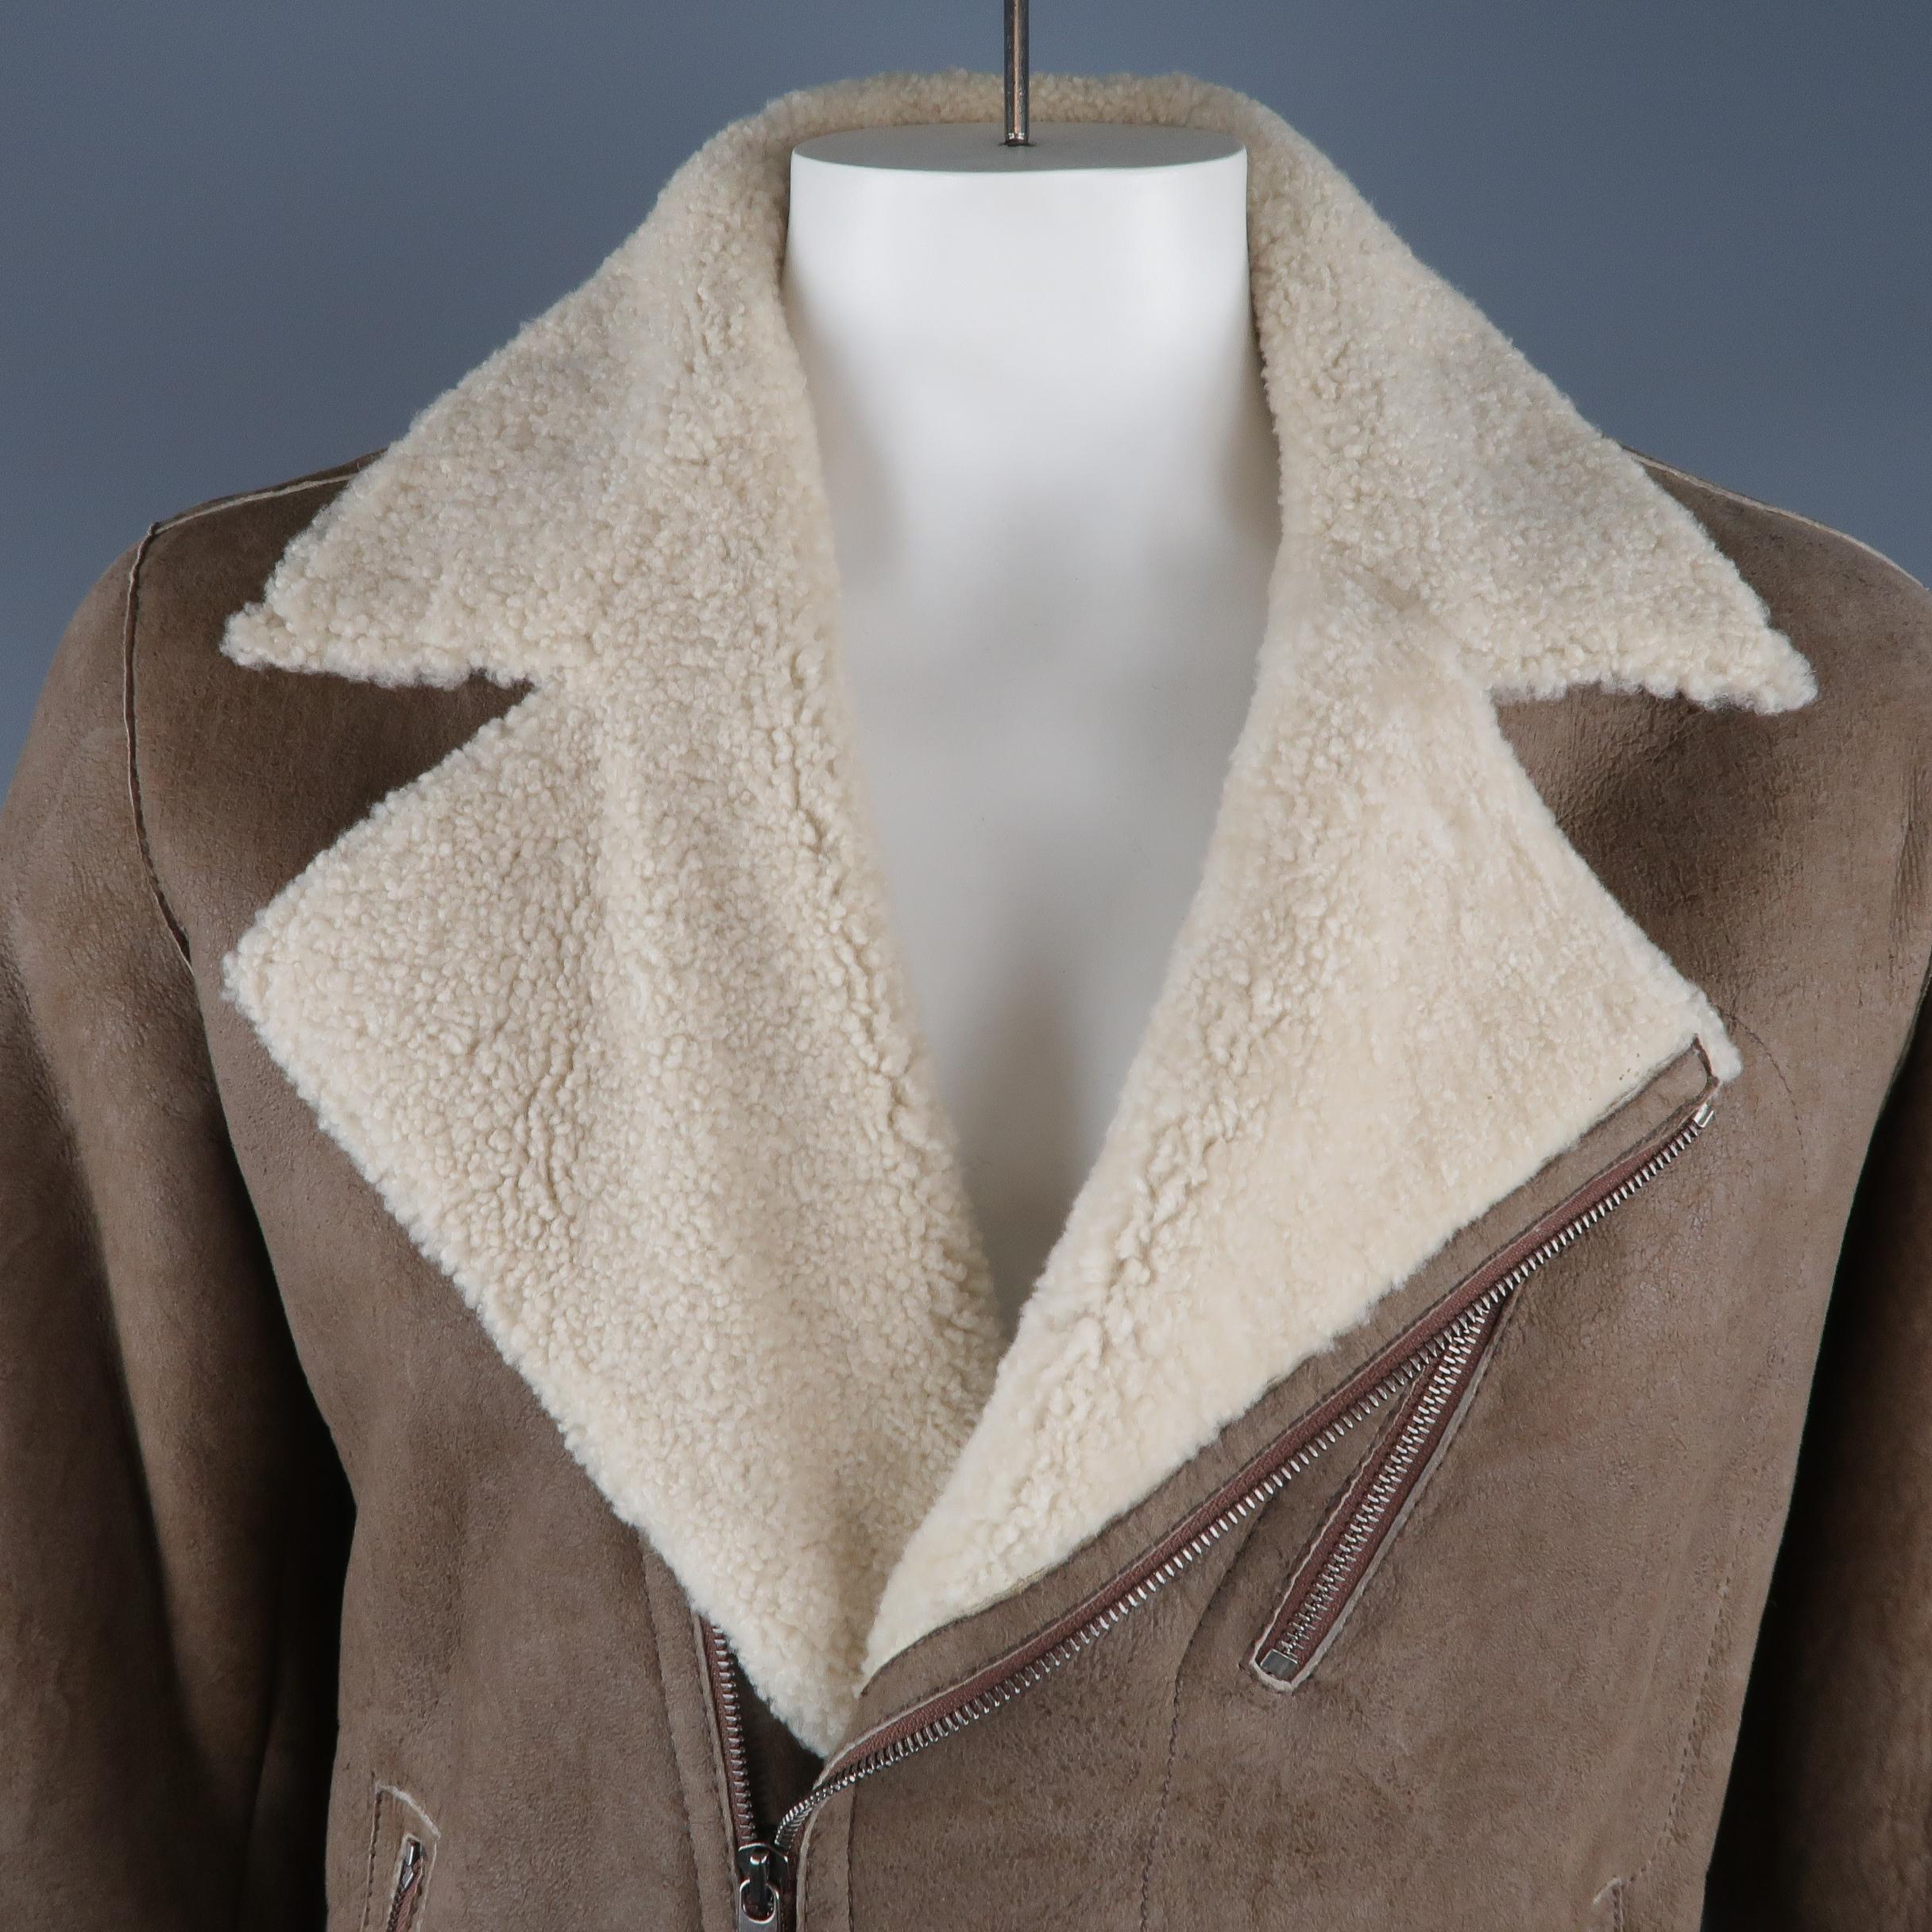 ZEGNA SPORT biker style jacket comes in tape distressed shearling with a cream fur lapel, asymmetrical zip closure, snap cuffs, and zip pockets.
 
Excellent Pre-Owned Condition.
Marked: L
 
Measurements:
 
Shoulder: 20 in.
Chest: 50 in.
Sleeve: 27